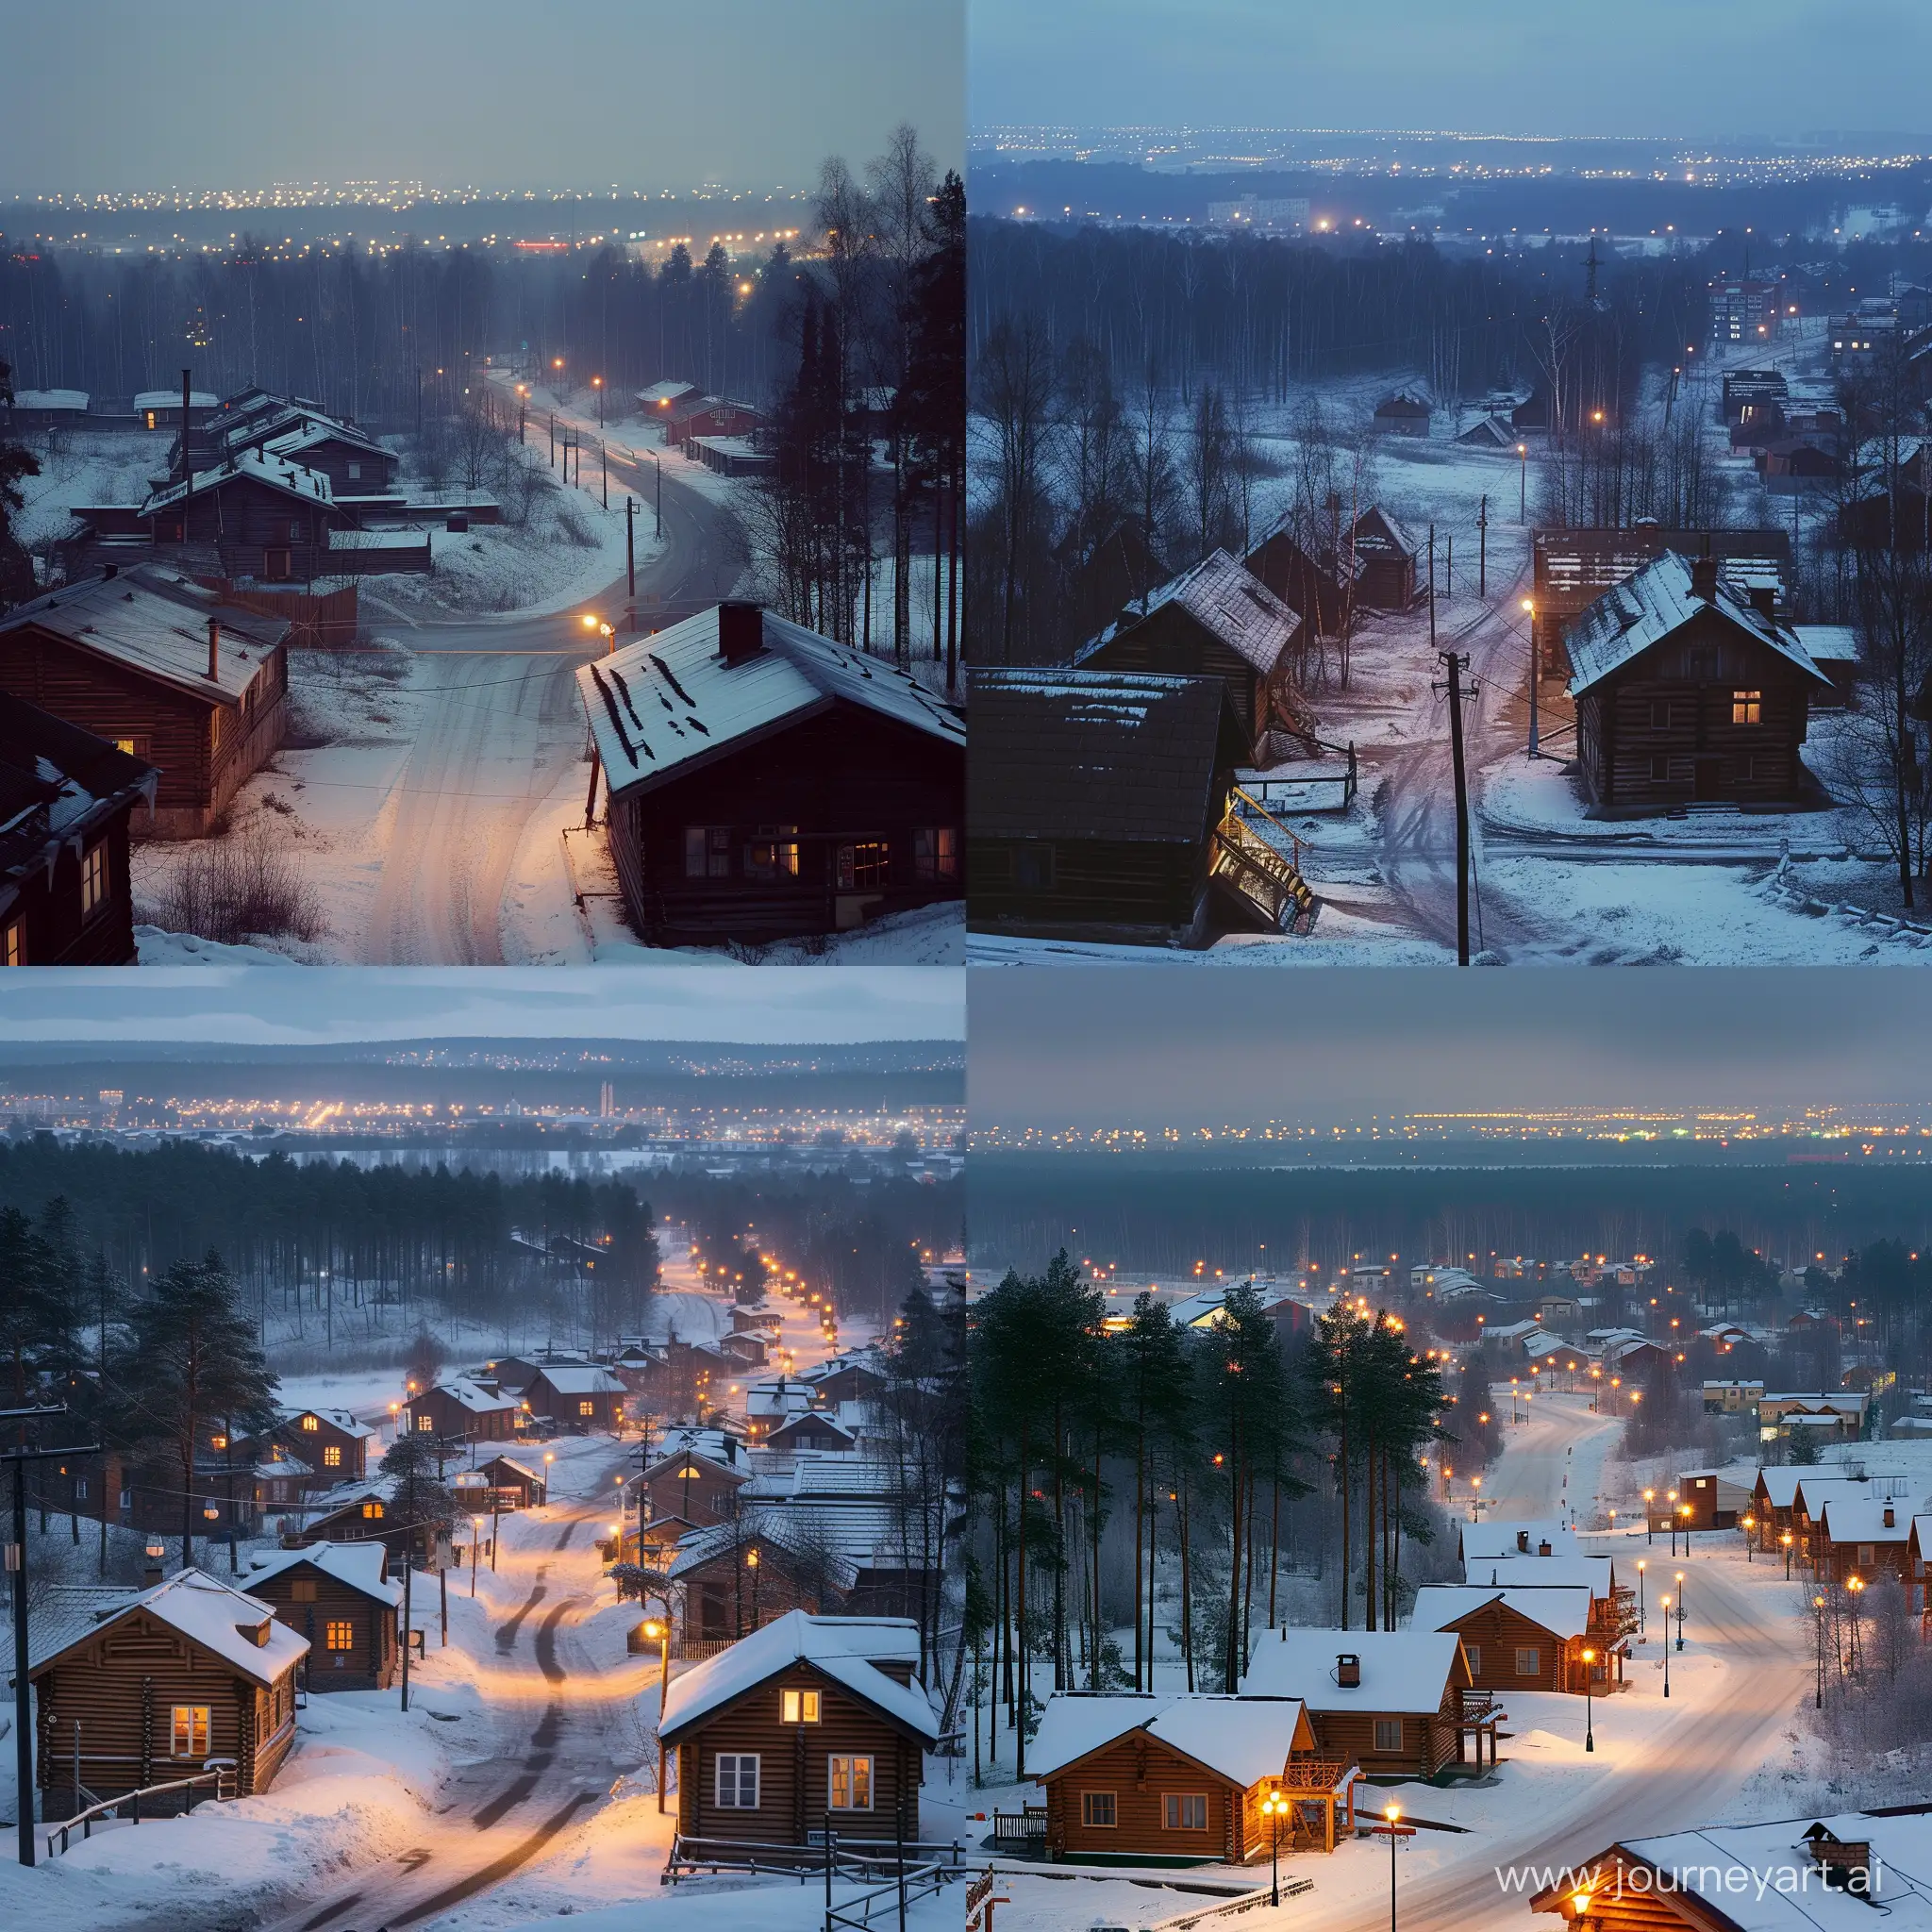 Cozy-Winter-Evening-in-a-Rustic-Village-with-City-Lights